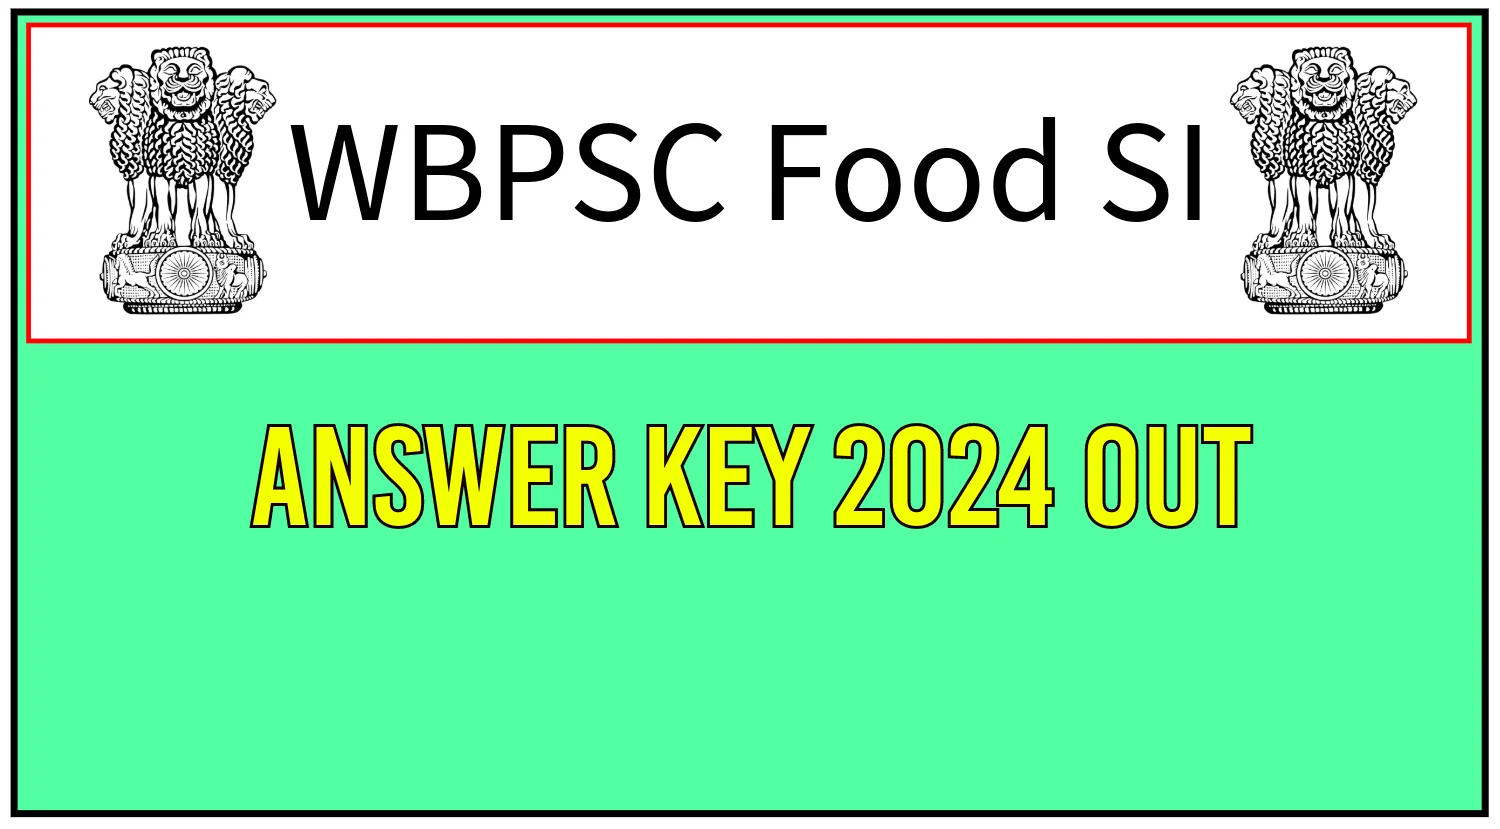 WBPSC FOOD SI Answer Key OUT